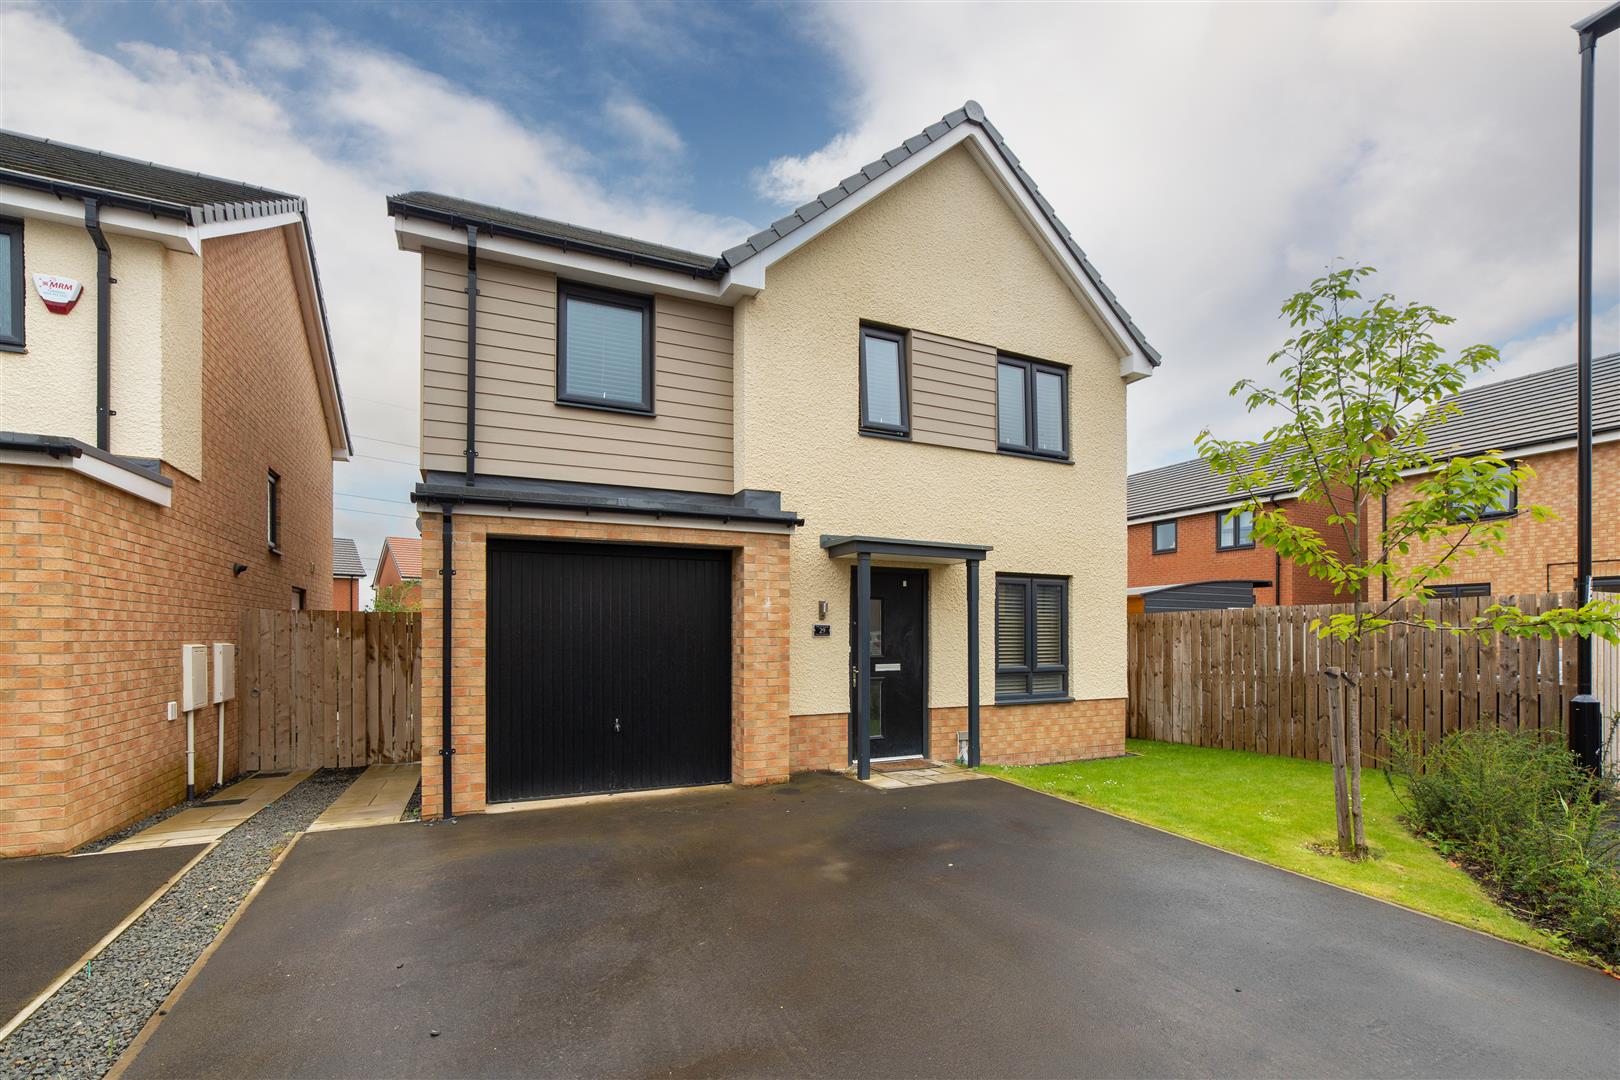 4 bed detached house to rent in Speckledwood Way, Great Park 0